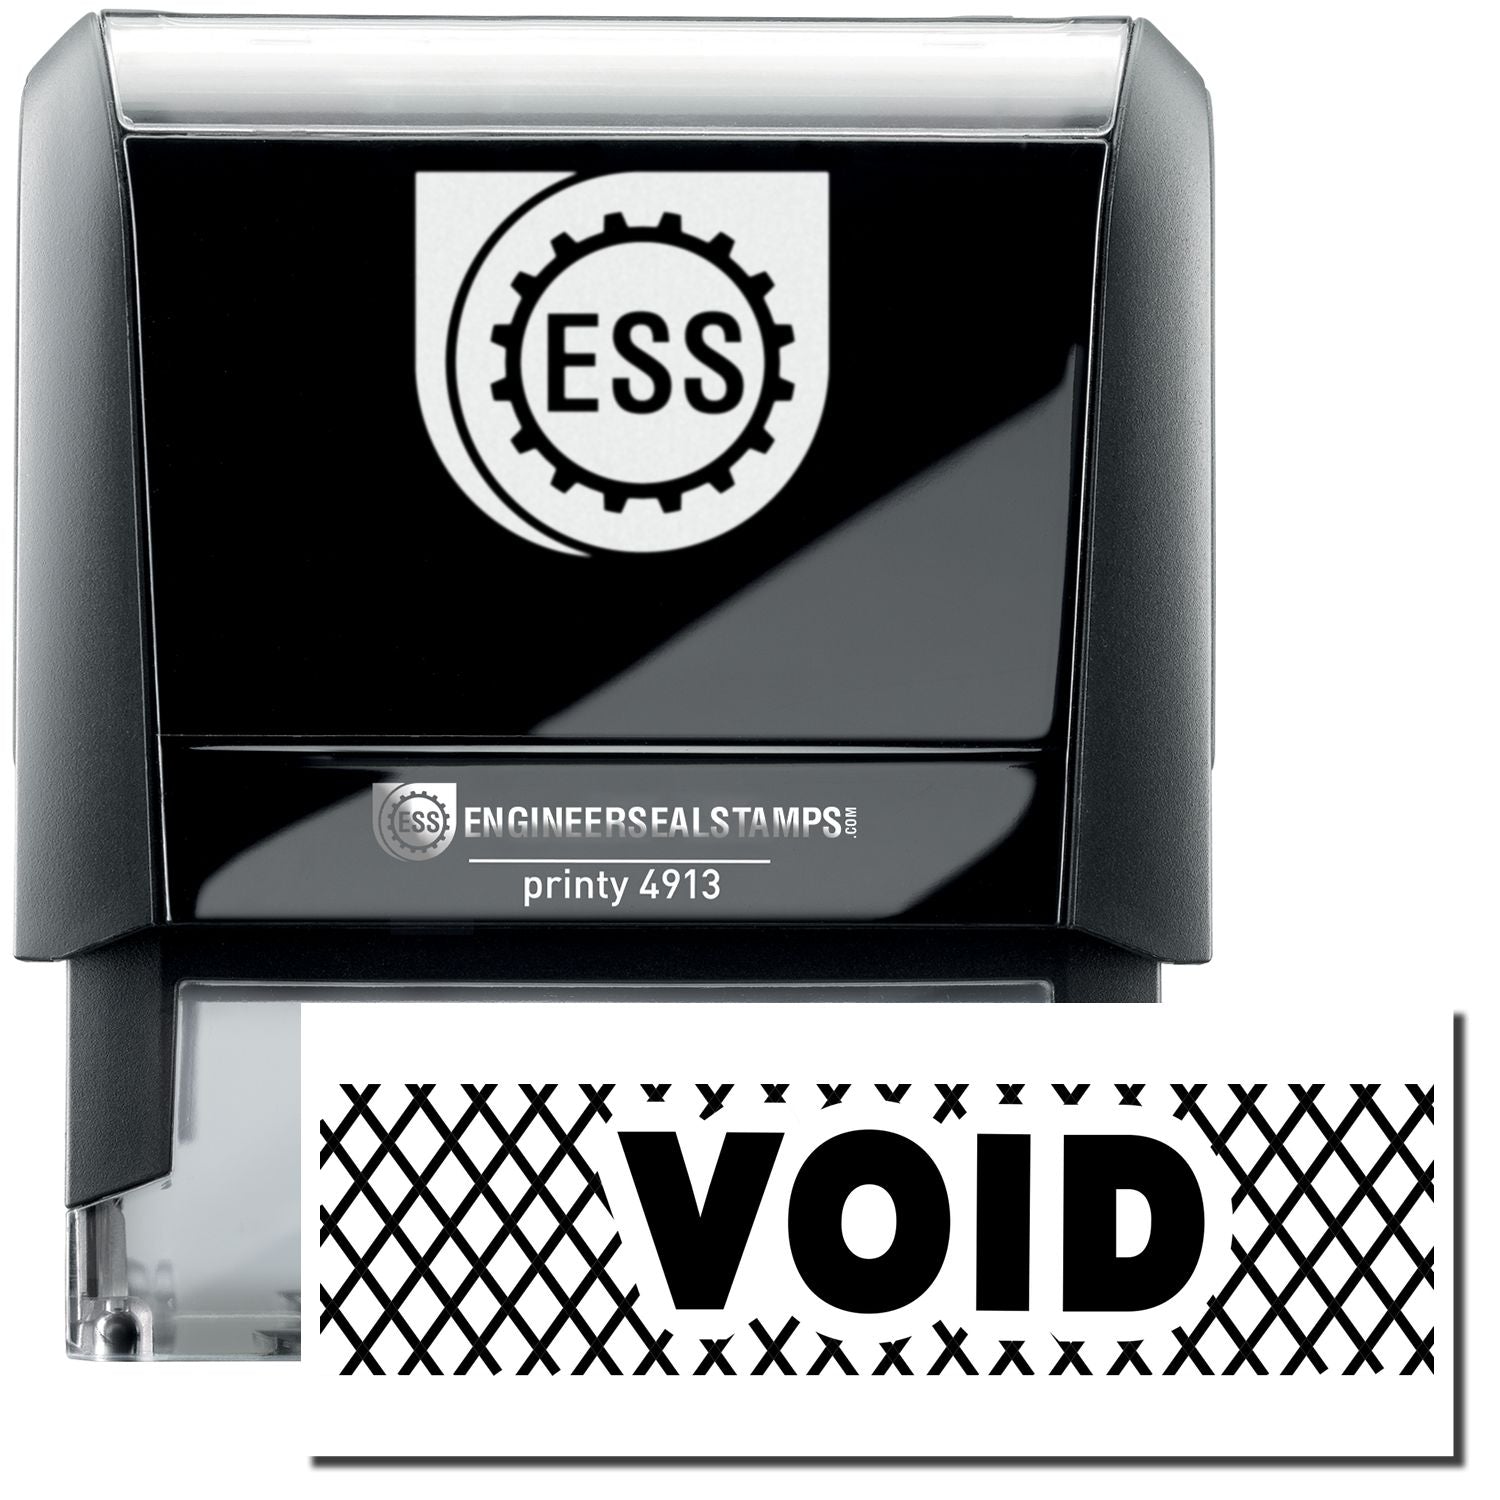 A self-inking stamp with a stamped image showing how the text "VOID" in a large font with Strikelines all around the text is displayed after stamping.